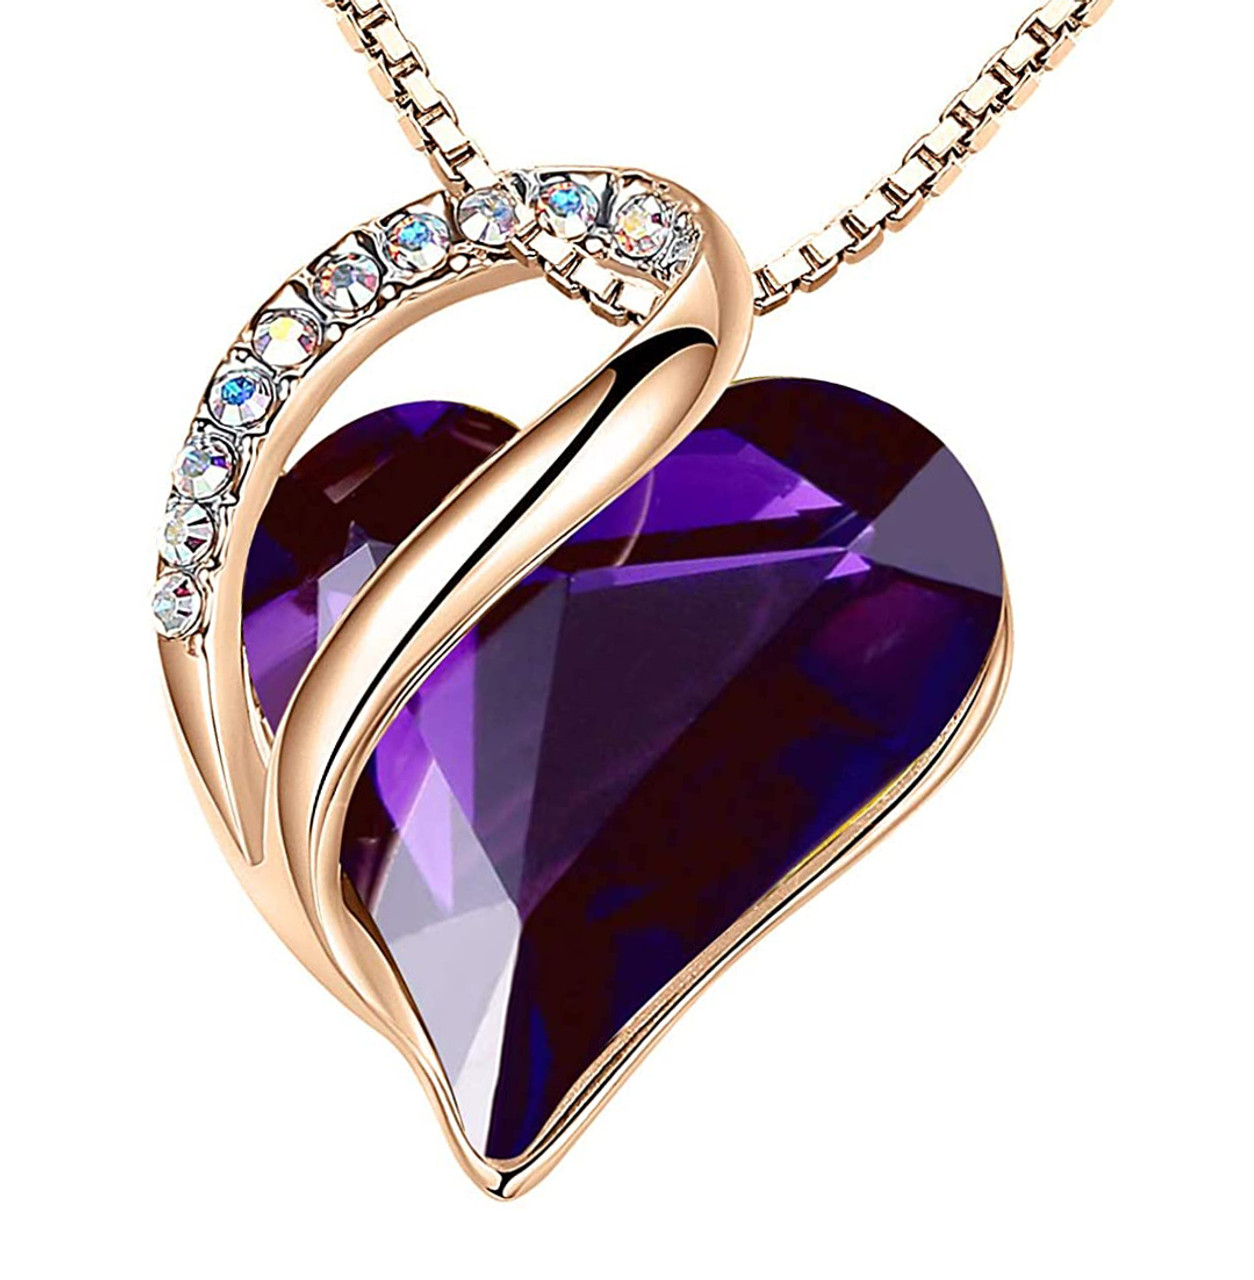 February  Birthstone - Purple / Dark Amethyst Looped Heart Design Crystal - Rose Gold Pendant and CZ stones - with 18" Chain Necklace. Gift for Lover, Girl Friend, Wife, Valentine's Day Gift, Mother's Day, Anniversary Gift Heart Necklace.